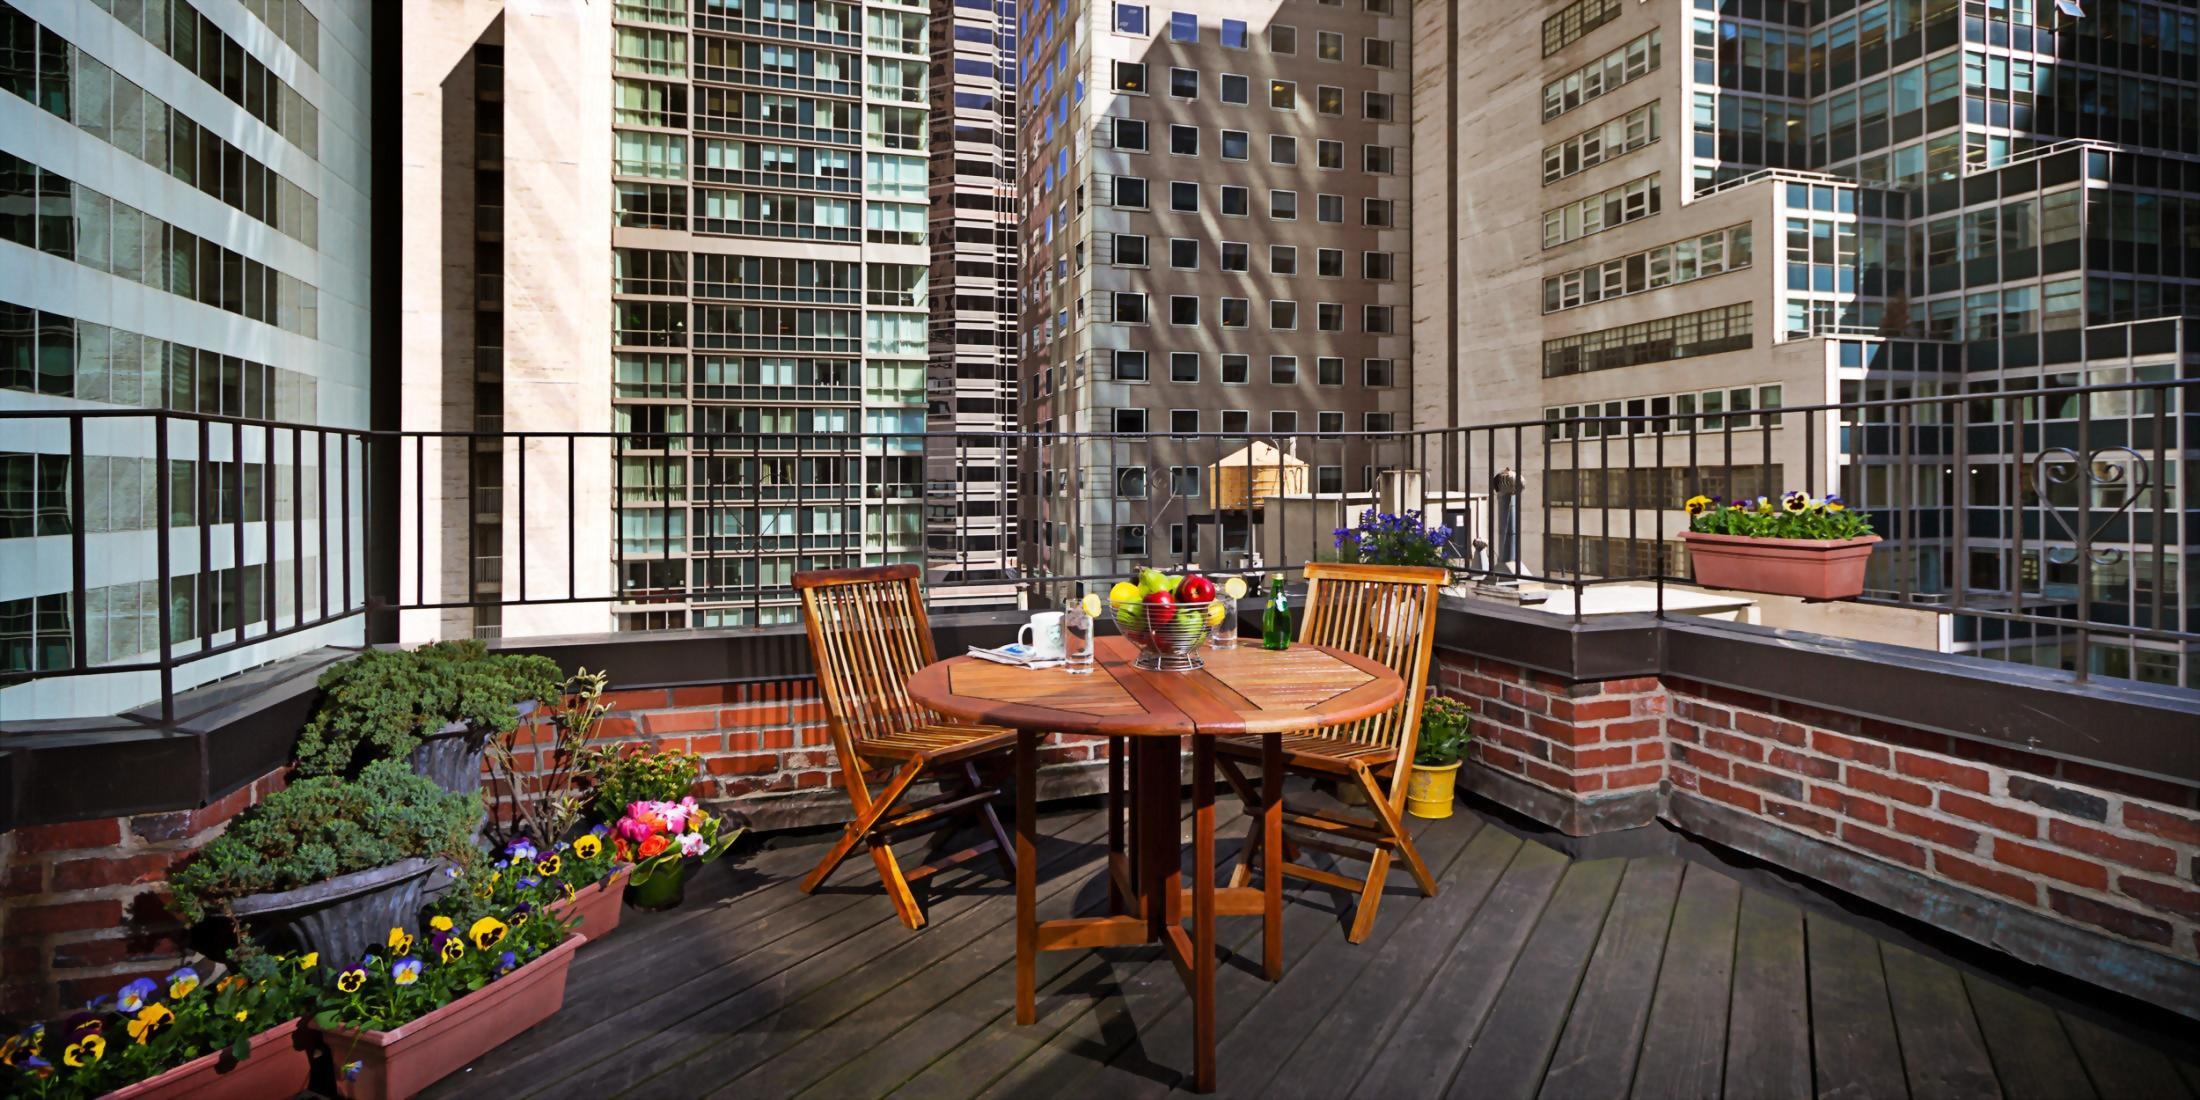 Outdoor Terrace only available in 4 very special rooms at the Hotel Elysee in New York City.